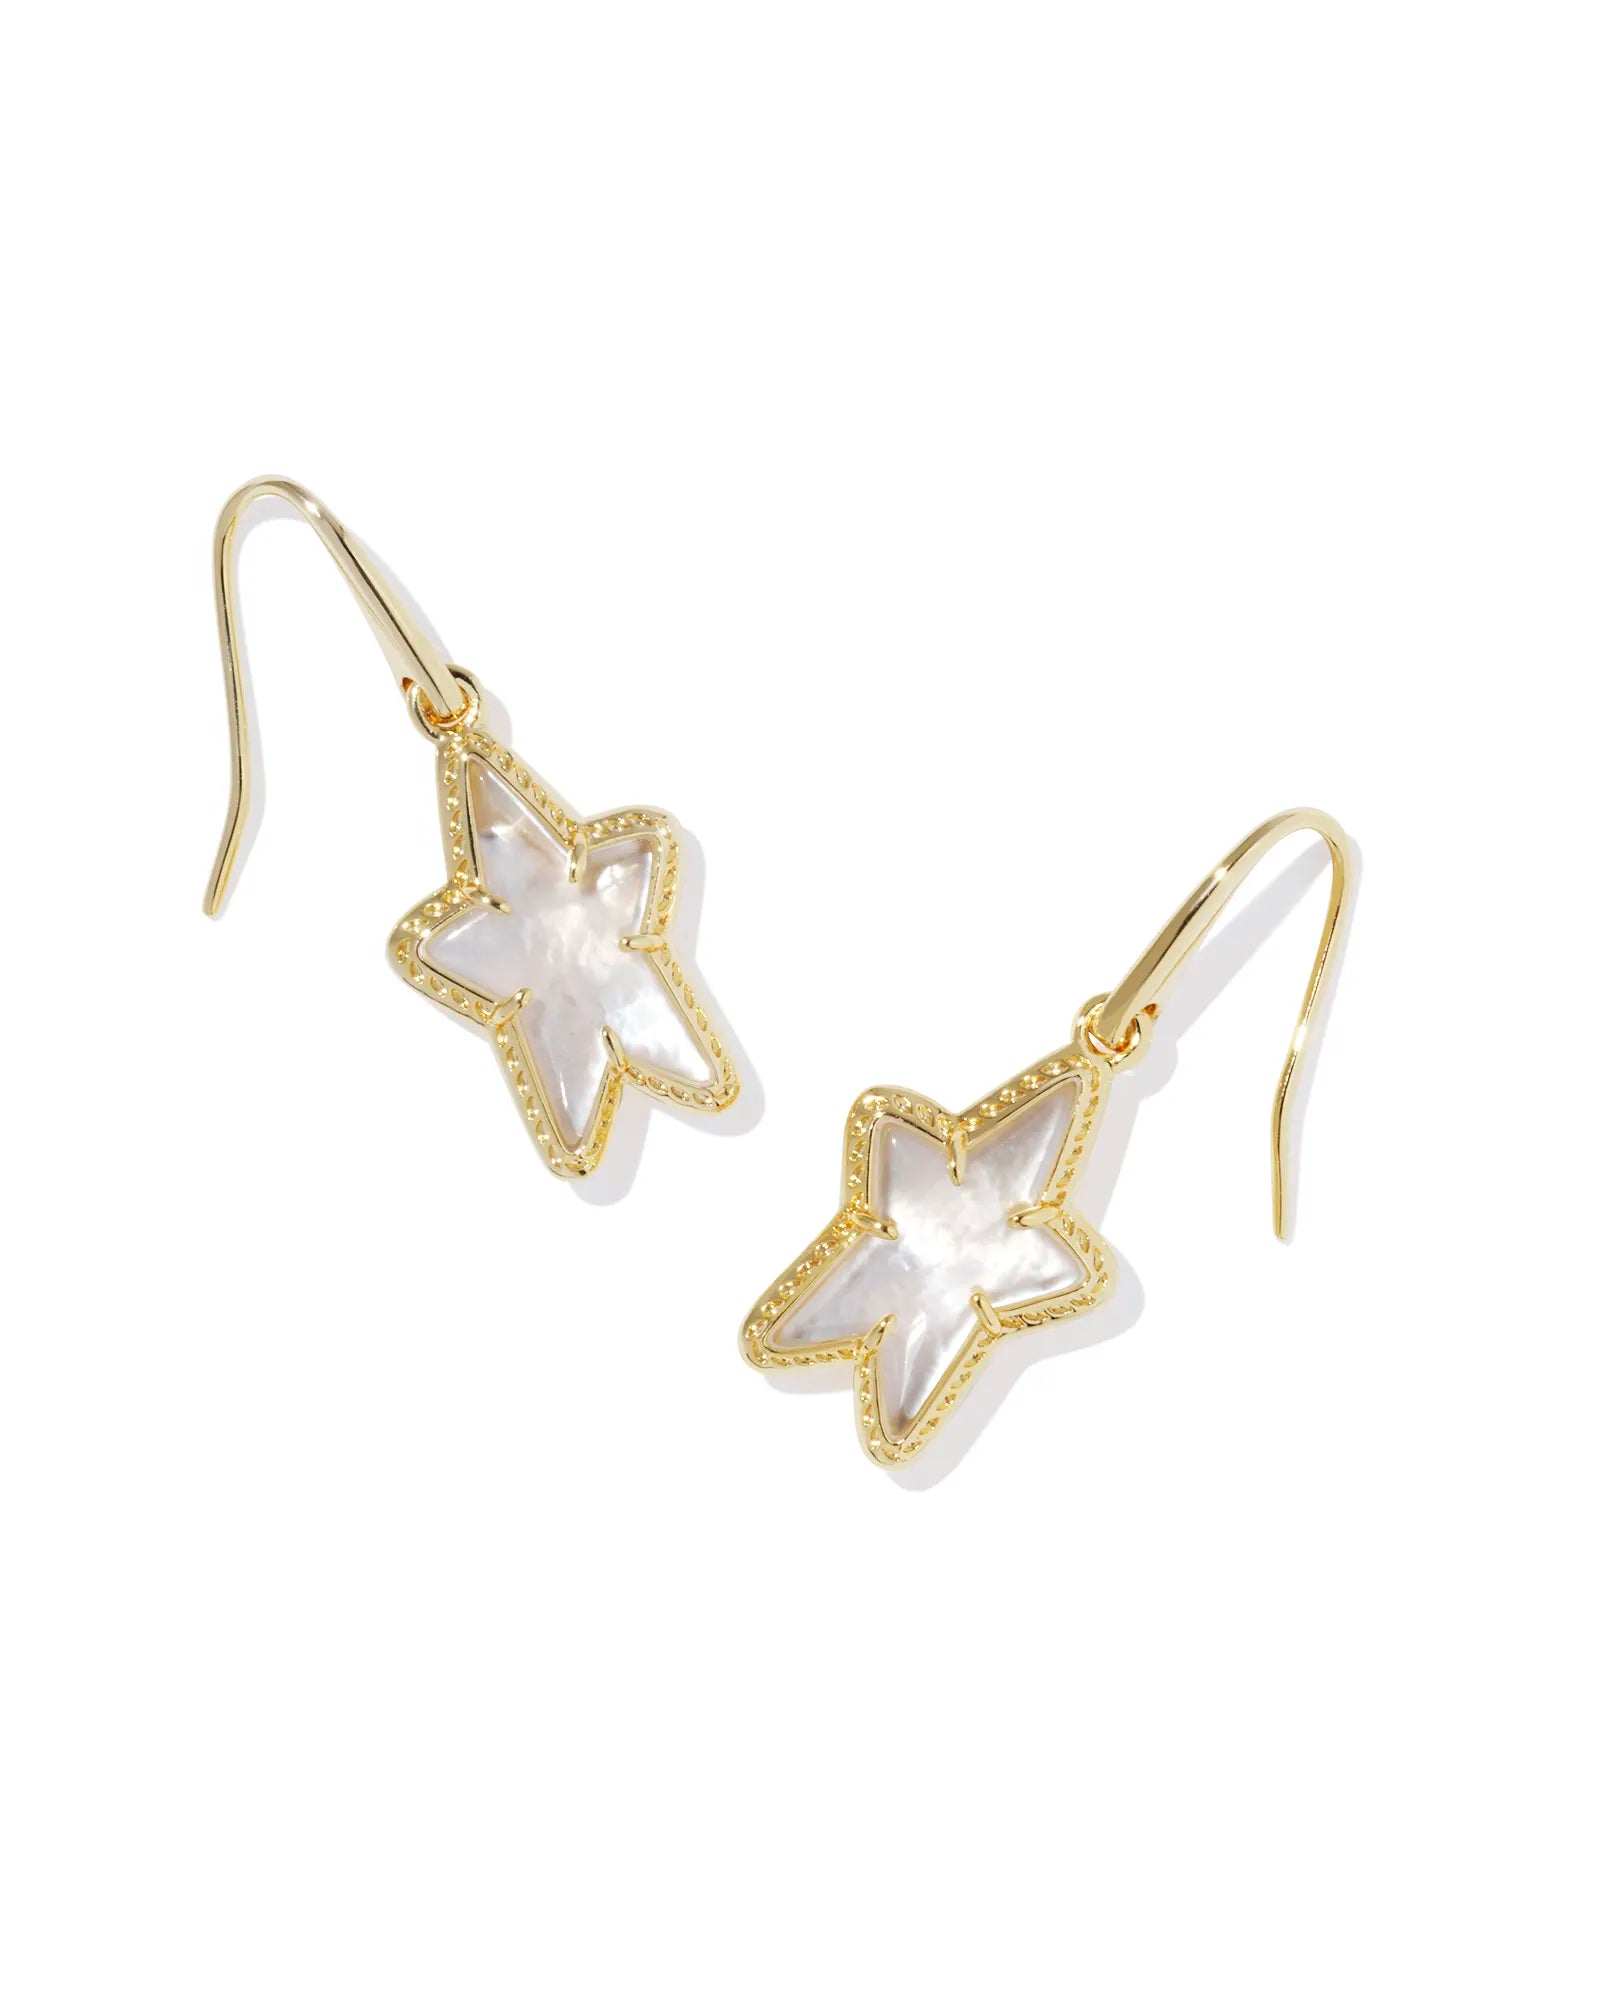 ADA STAR SM DROP EARRING - GOLD IVORY MOTHER OF PEARL